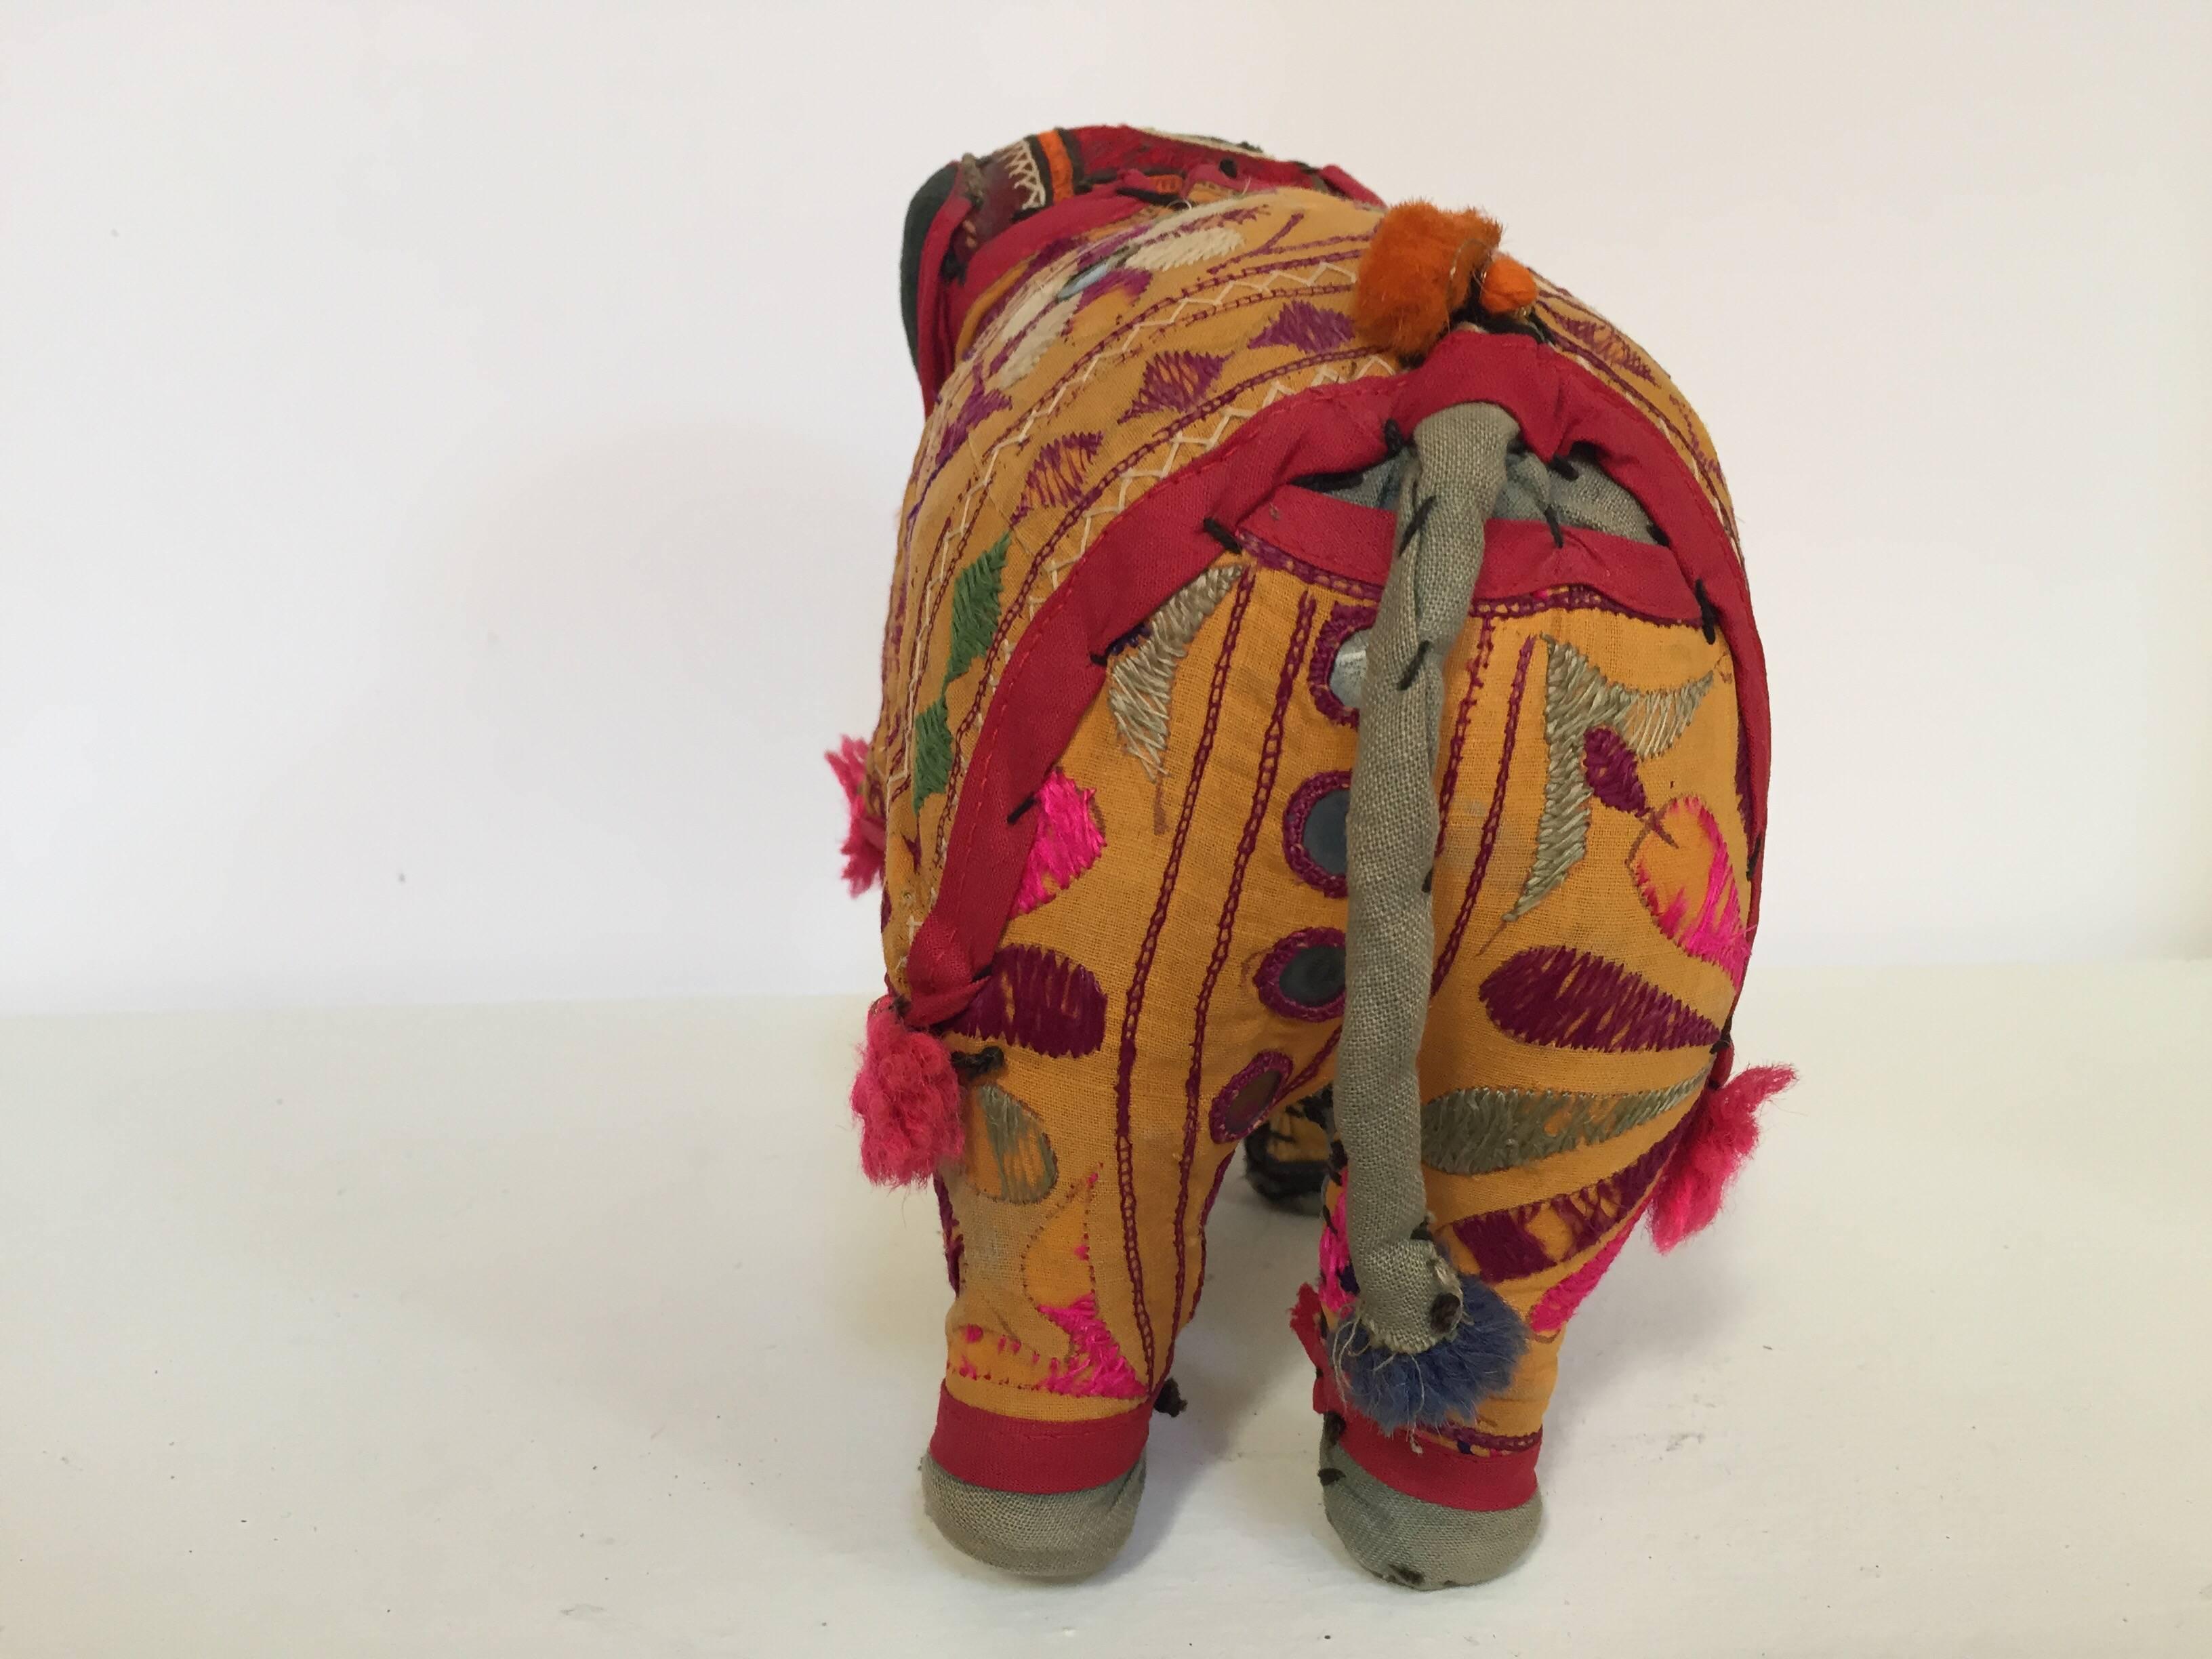 Handmade in Rajasthan, India, colorful fabric elephant toy.
Vintage small elephant stuffed cotton embroidered and decorated with small mirrors, great collector piece.
Anglo Raj, small stuffed elephant wearing the ceremonial folk attire made from